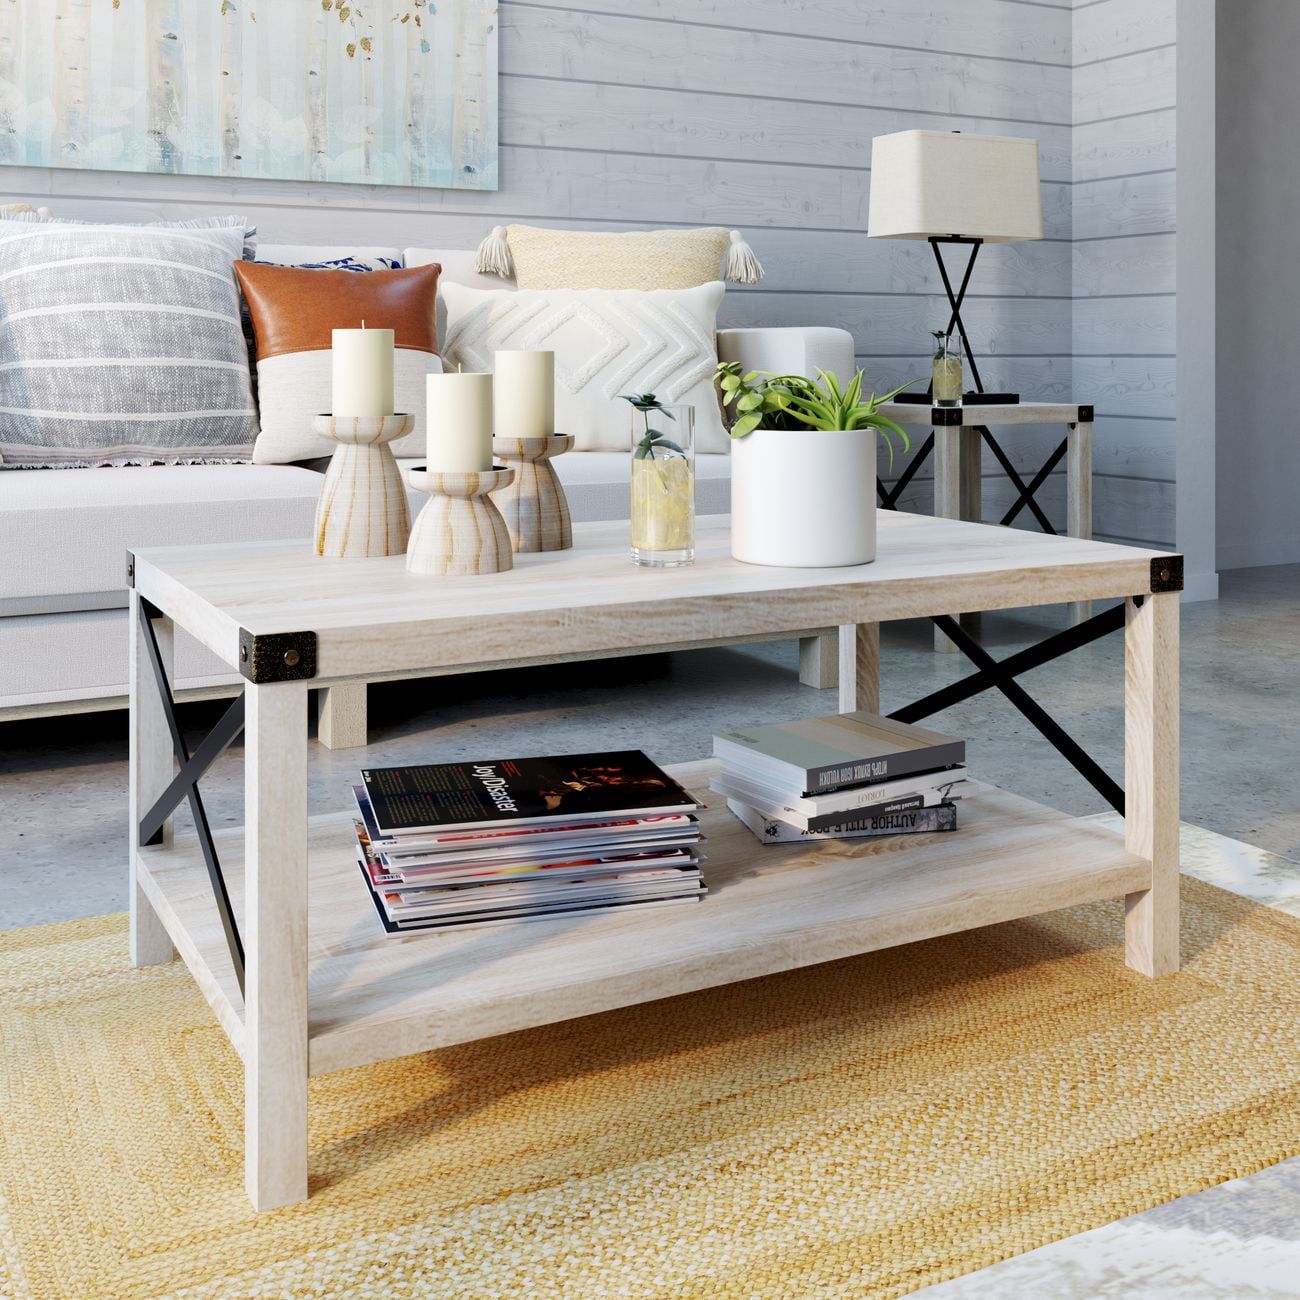 Woven Paths Magnolia Metal X Coffee Table, White Oak – Walmart For Woven Paths Coffee Tables (Photo 9 of 15)